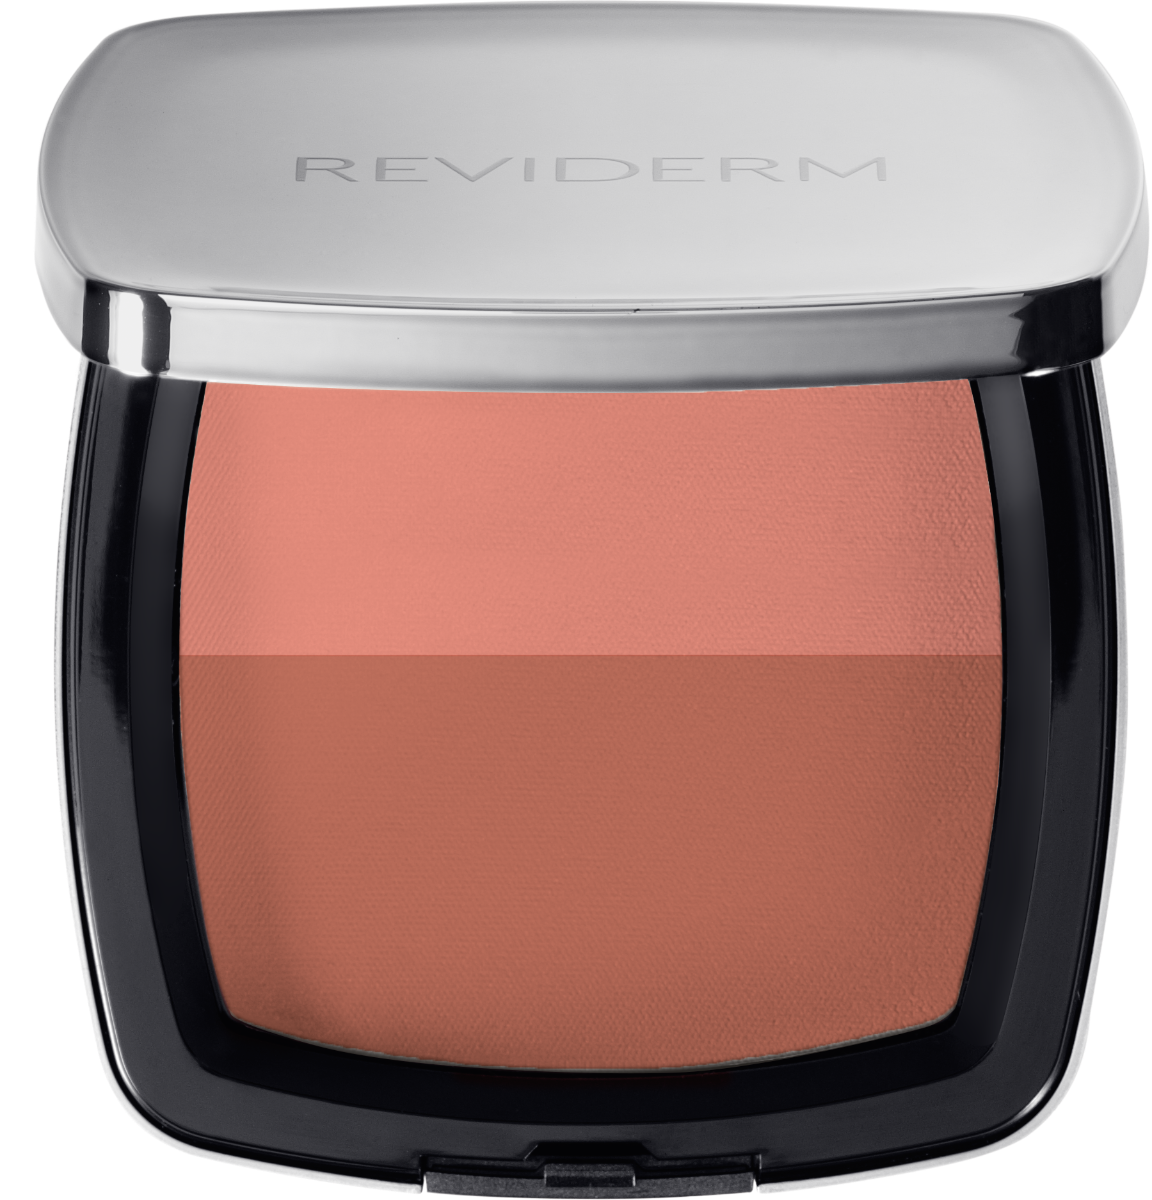 Mineral Duo Blush 1W peach-rosewood